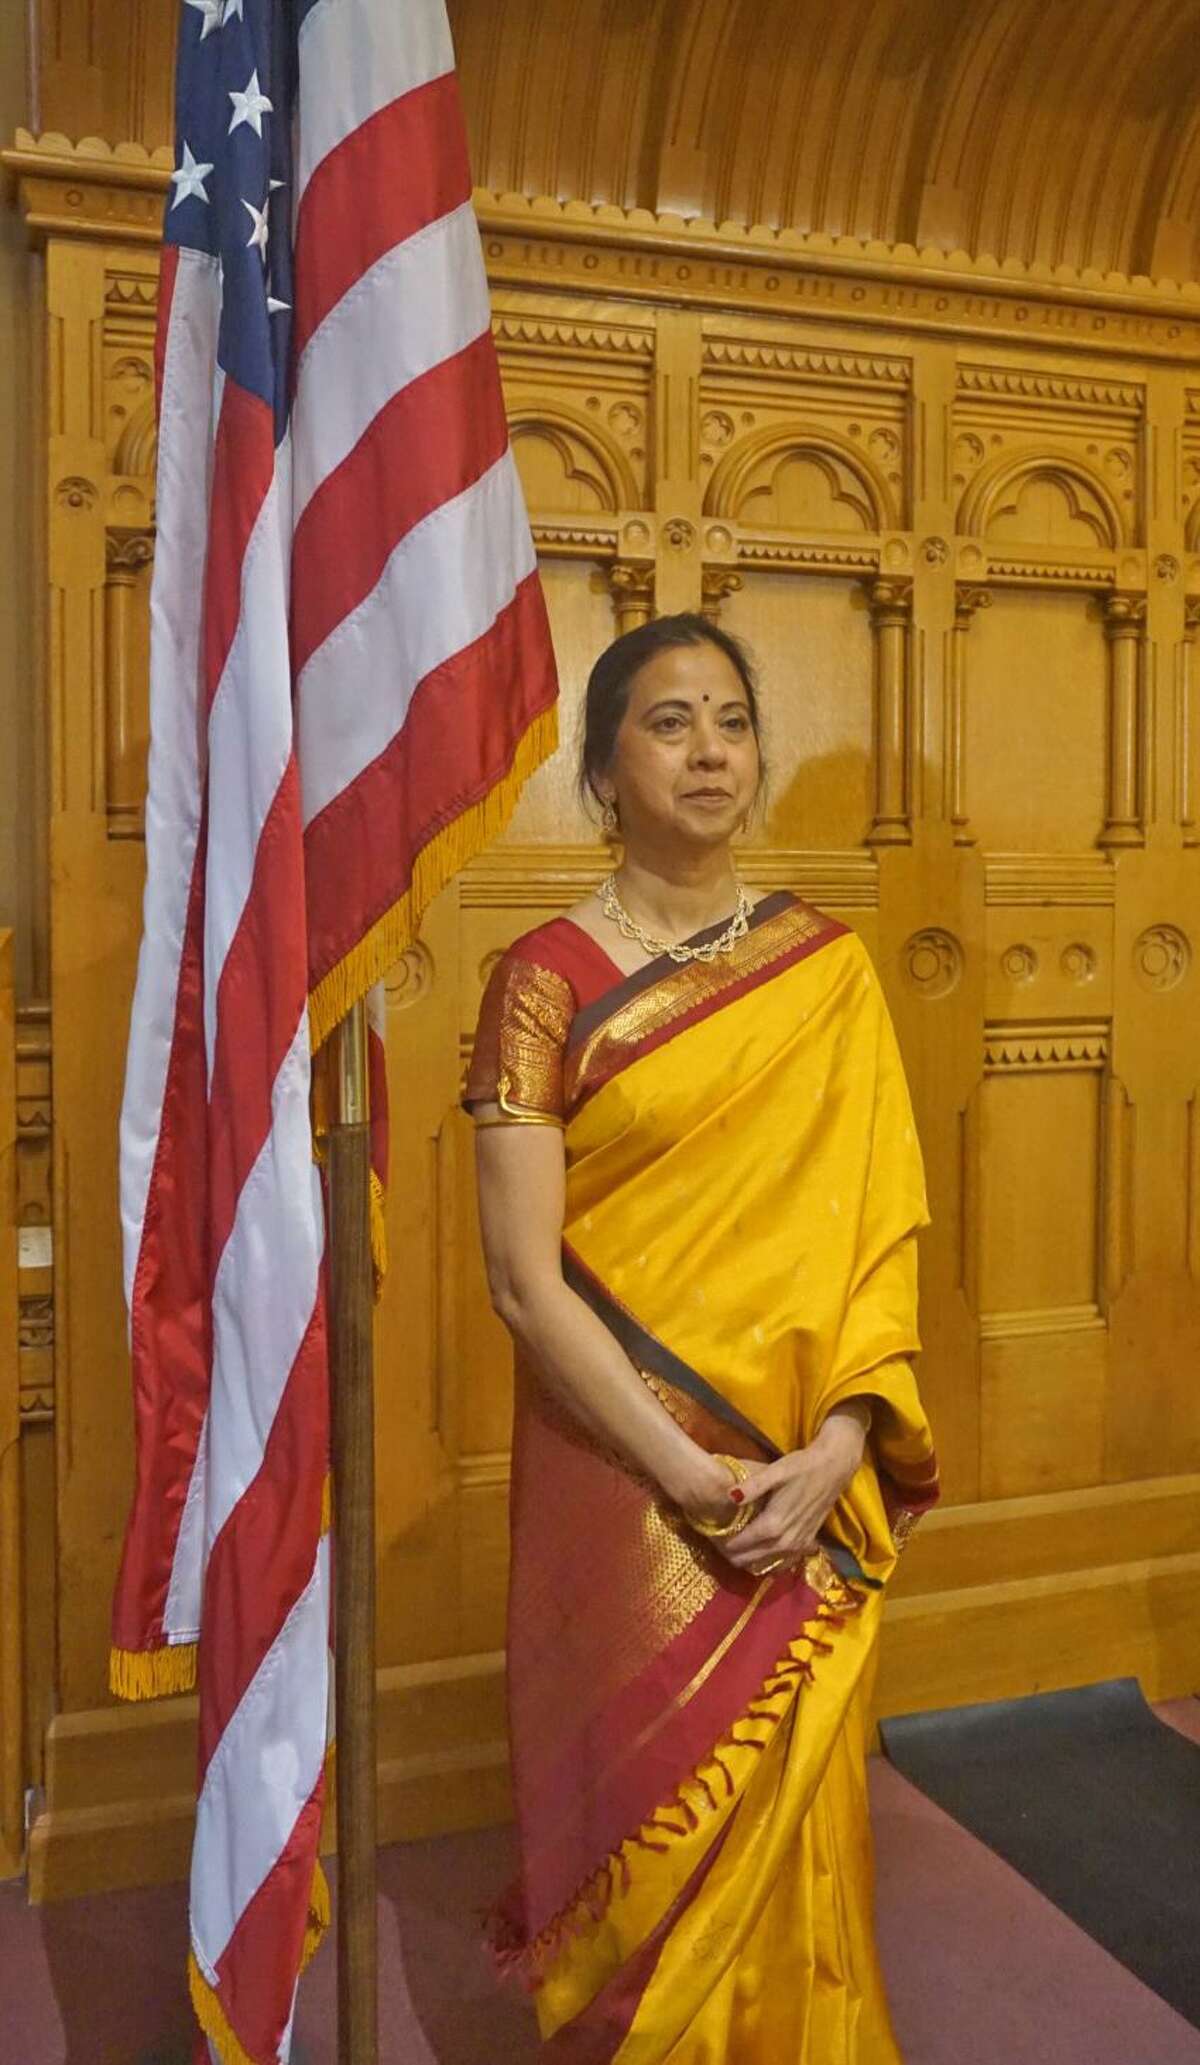 Vani Nidadavolu of Trumbull was honored on Connecticut Immigrant Day, Wednesday April 4, 2018, at the Capitol in Hartford, Conn. for teaching Indian-Americans tradition Indian dance forms.